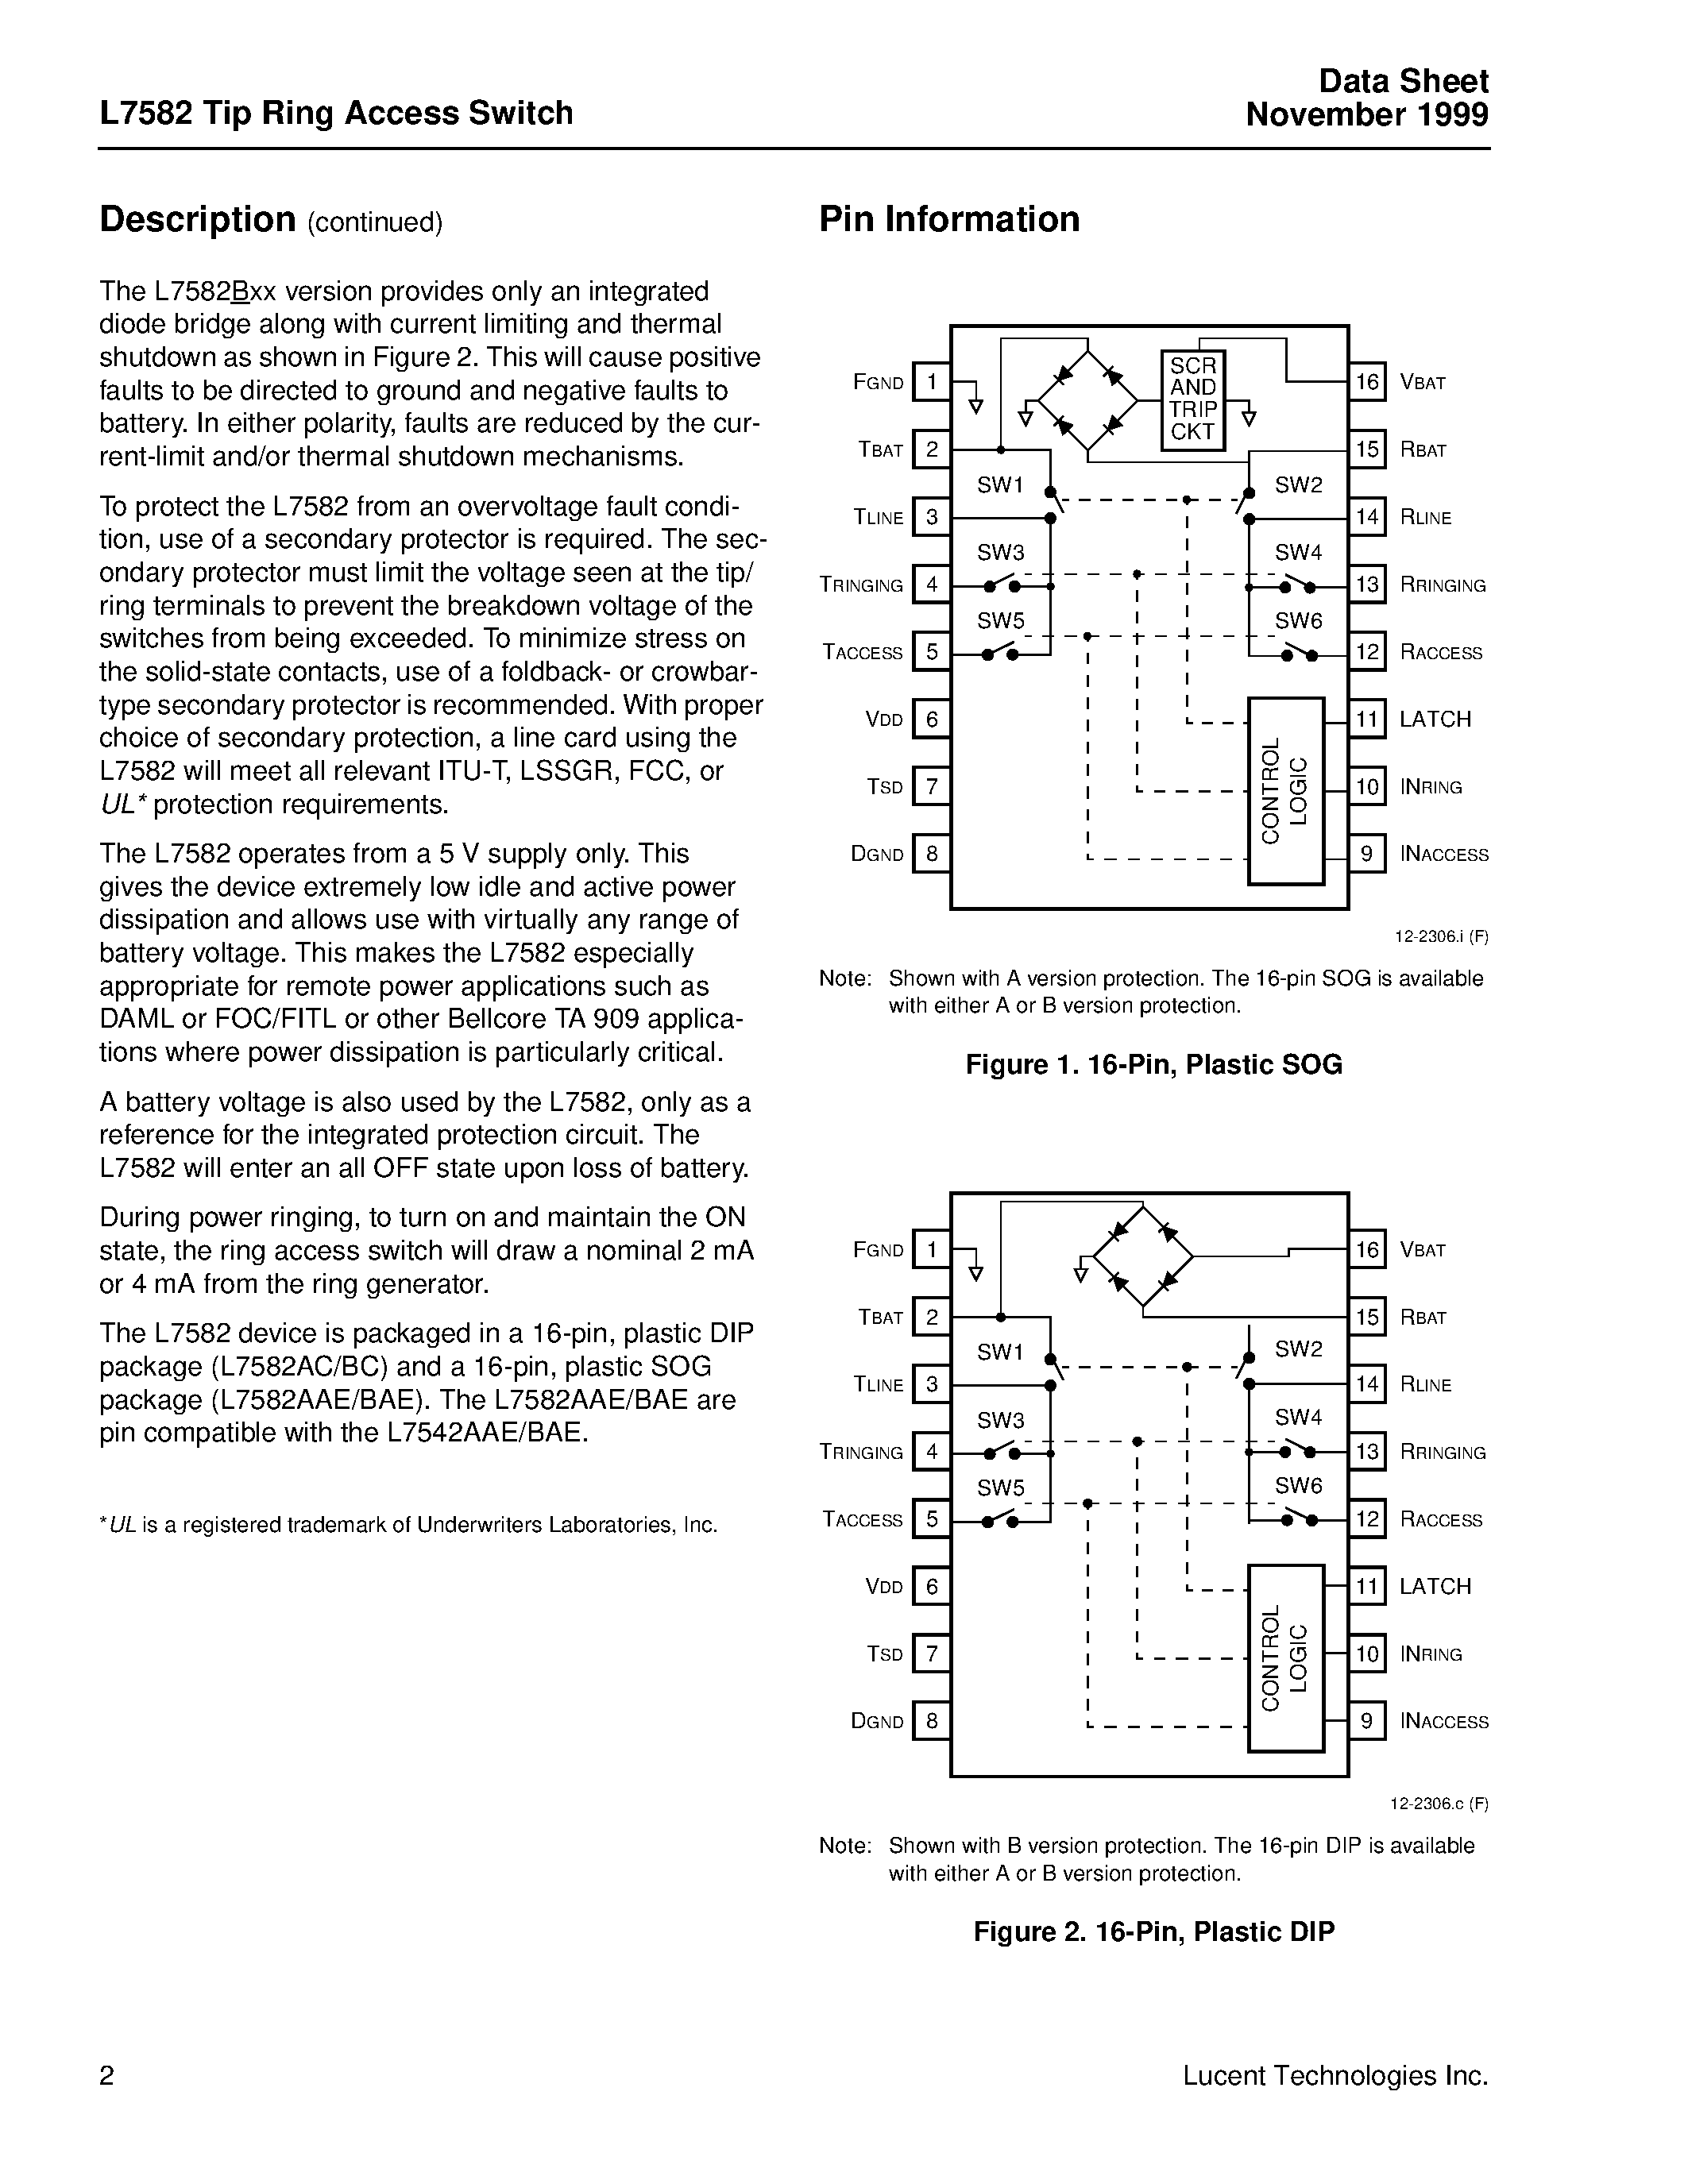 Datasheet ATTL7582AAE - Tip Ring Access Switch page 2